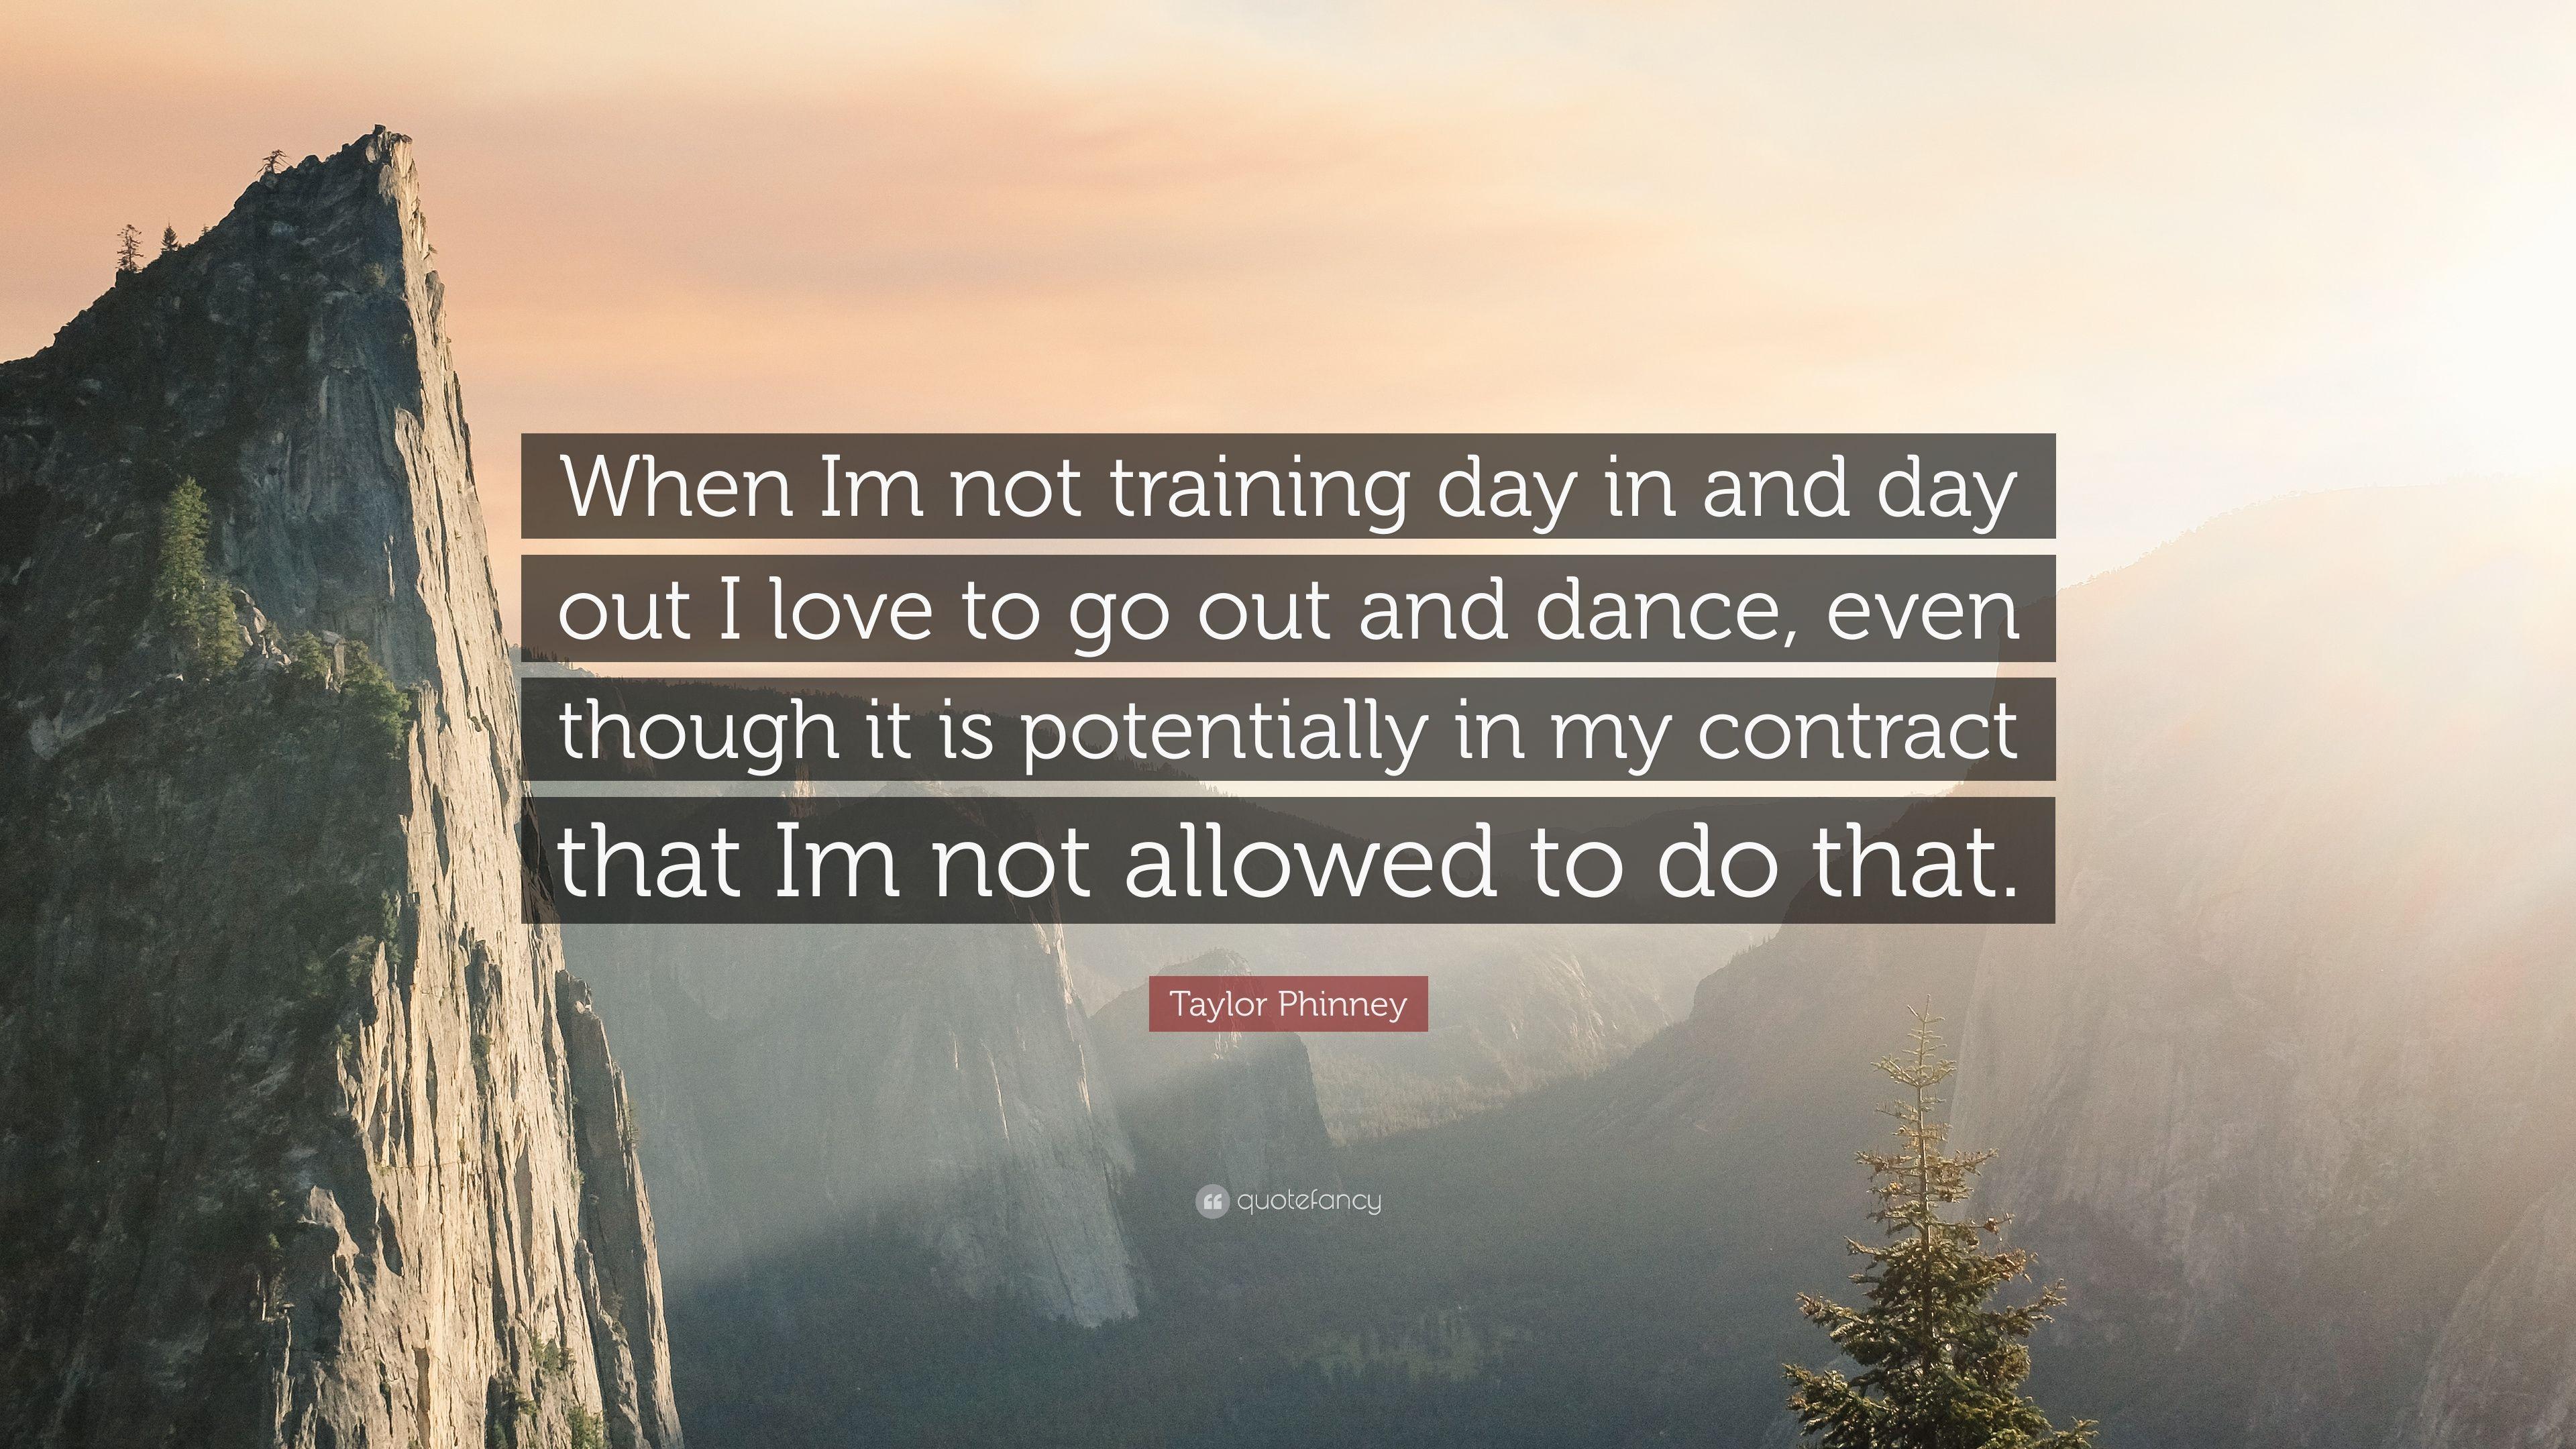 Taylor Phinney Quote: “When Im not training day in and day out I